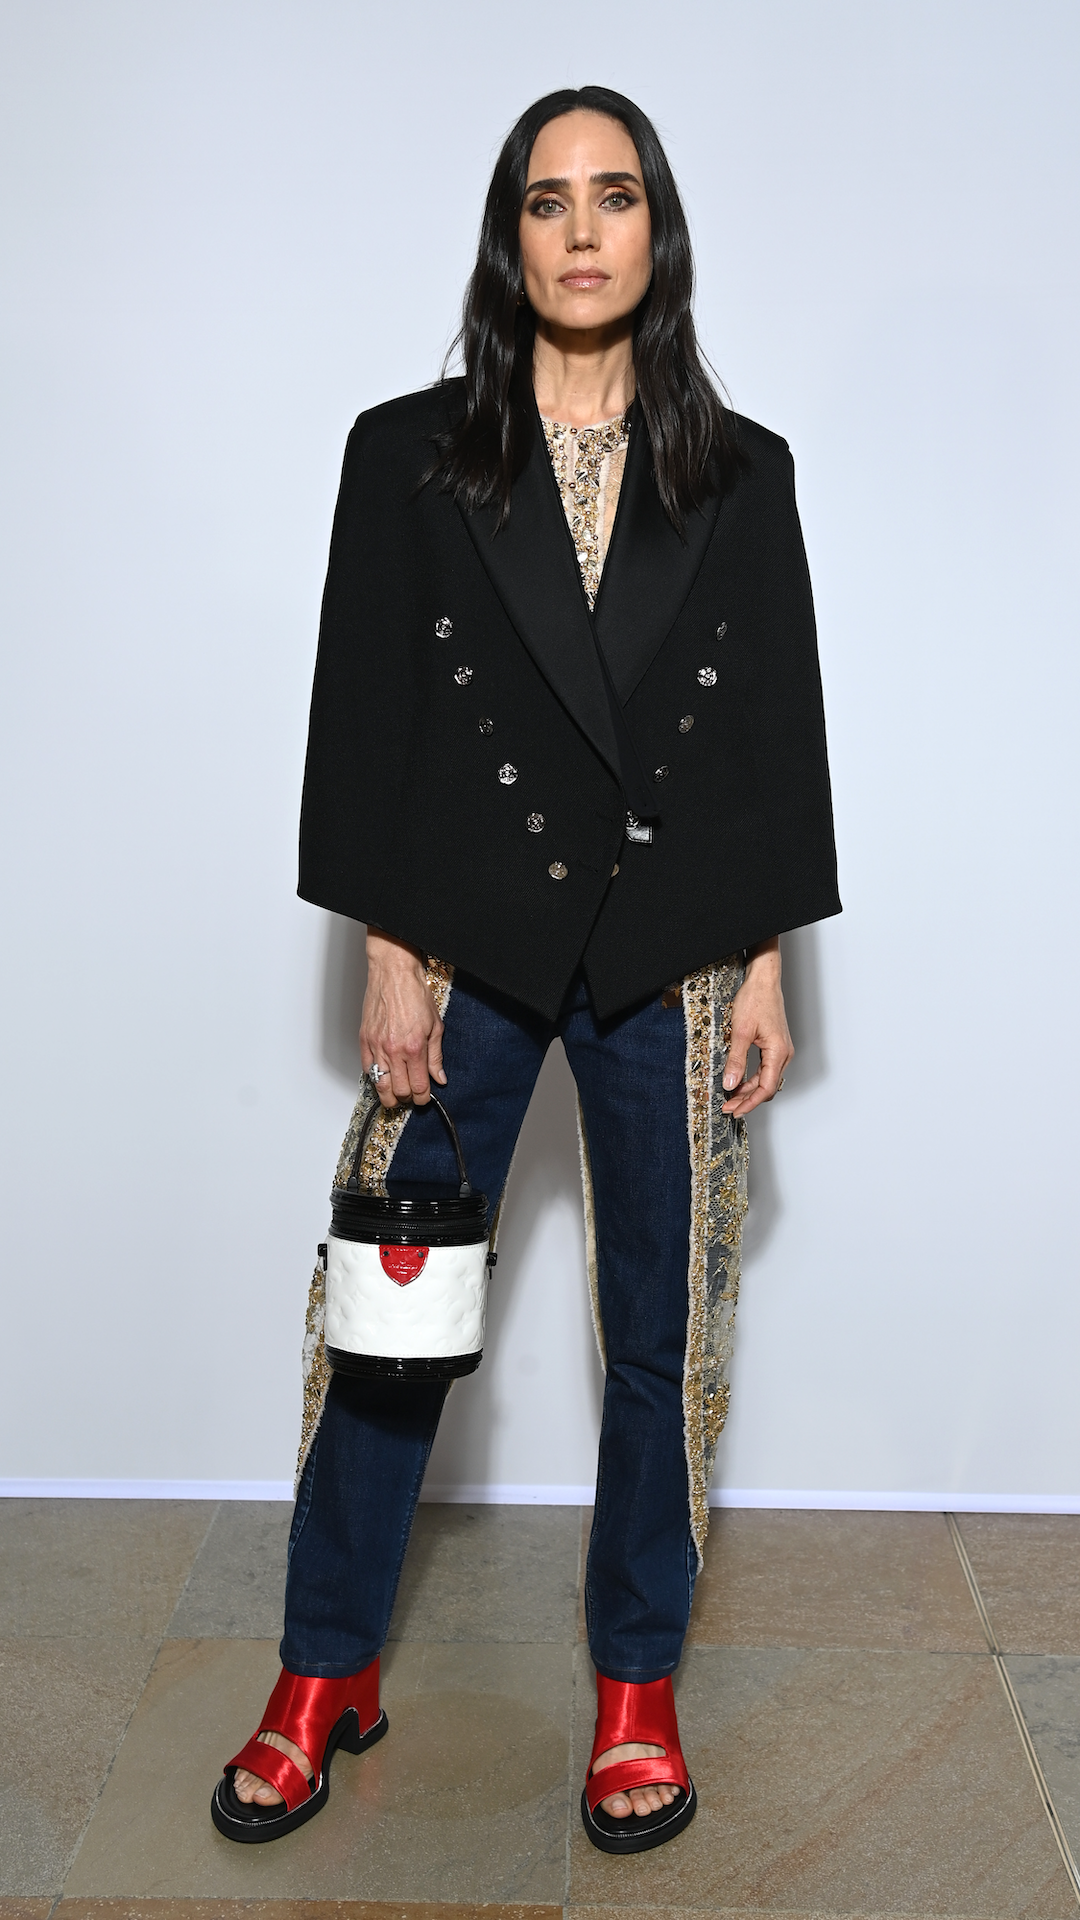 <p>                     Slim-fit denim makes one of the best jeans styles for dressing up or down. Connelly took the former approach to attend the Louis Vuitton show during Paris Fashion Week in 2022. She wowed in an embroidered navy pair with an embroidered detail down the leg, along with a black tuxedo-style jacket. The actress accessorised with a statement bucket-style handbag and metallic chunky red-heeled sandals.                   </p>